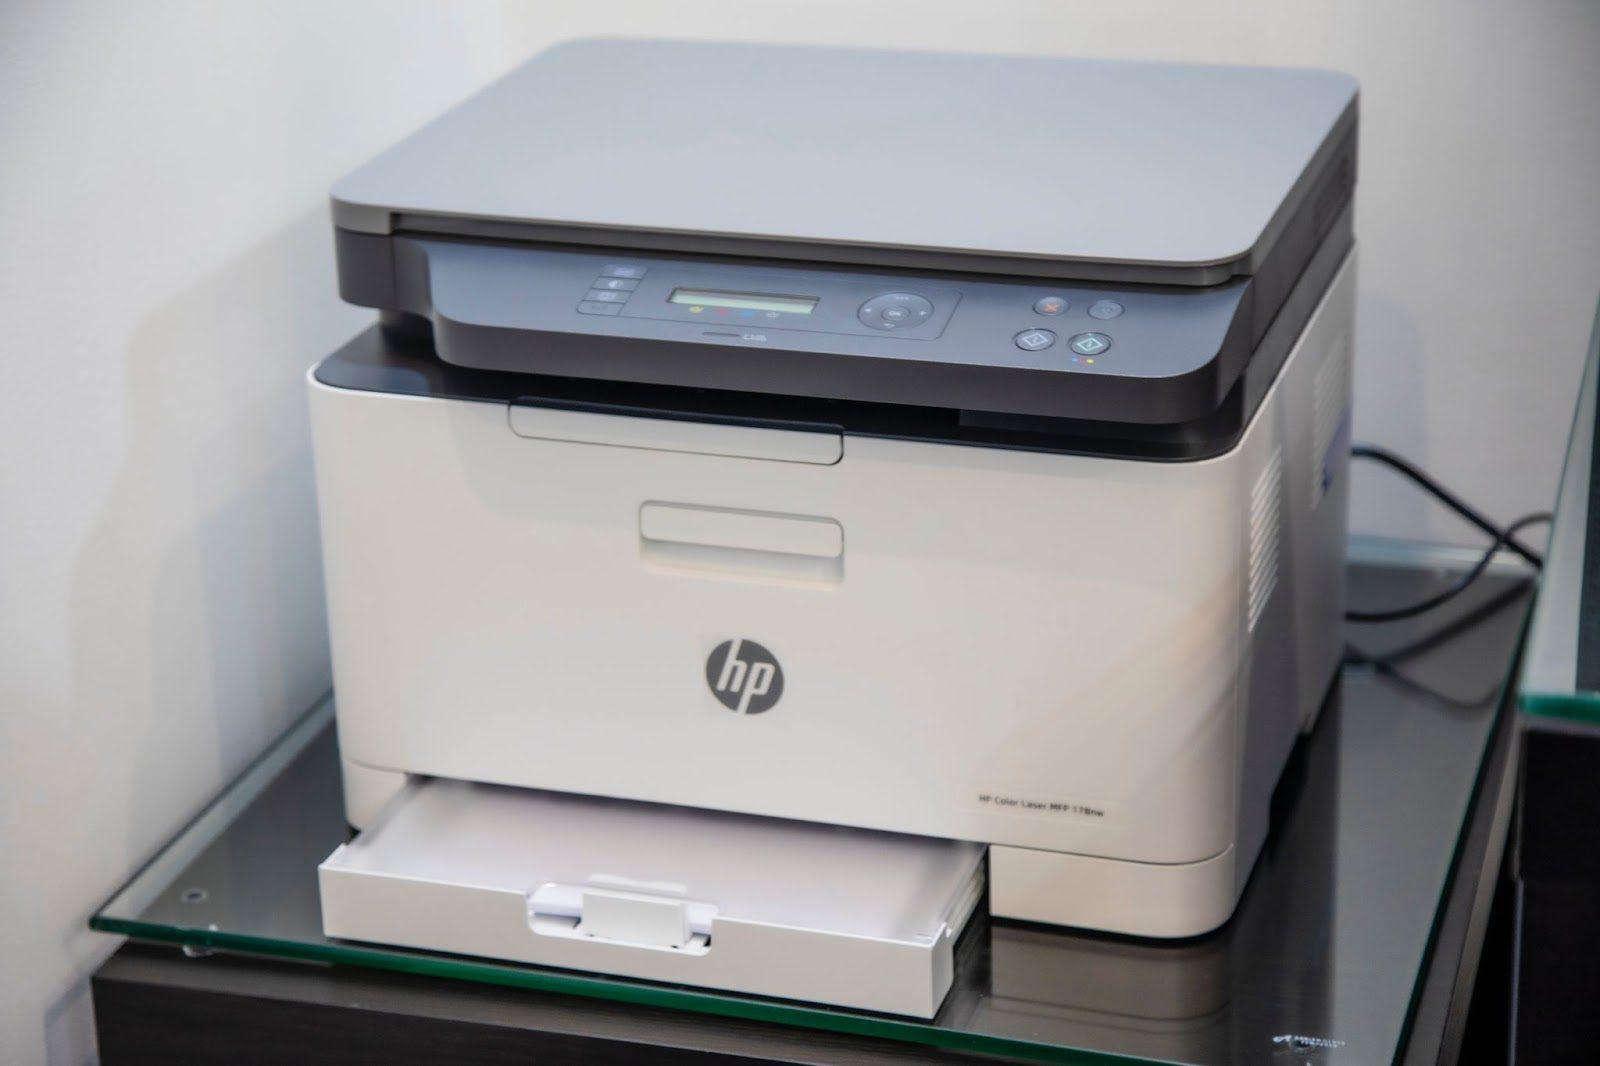 A white HP laser printer perfect for your home office upgrade.